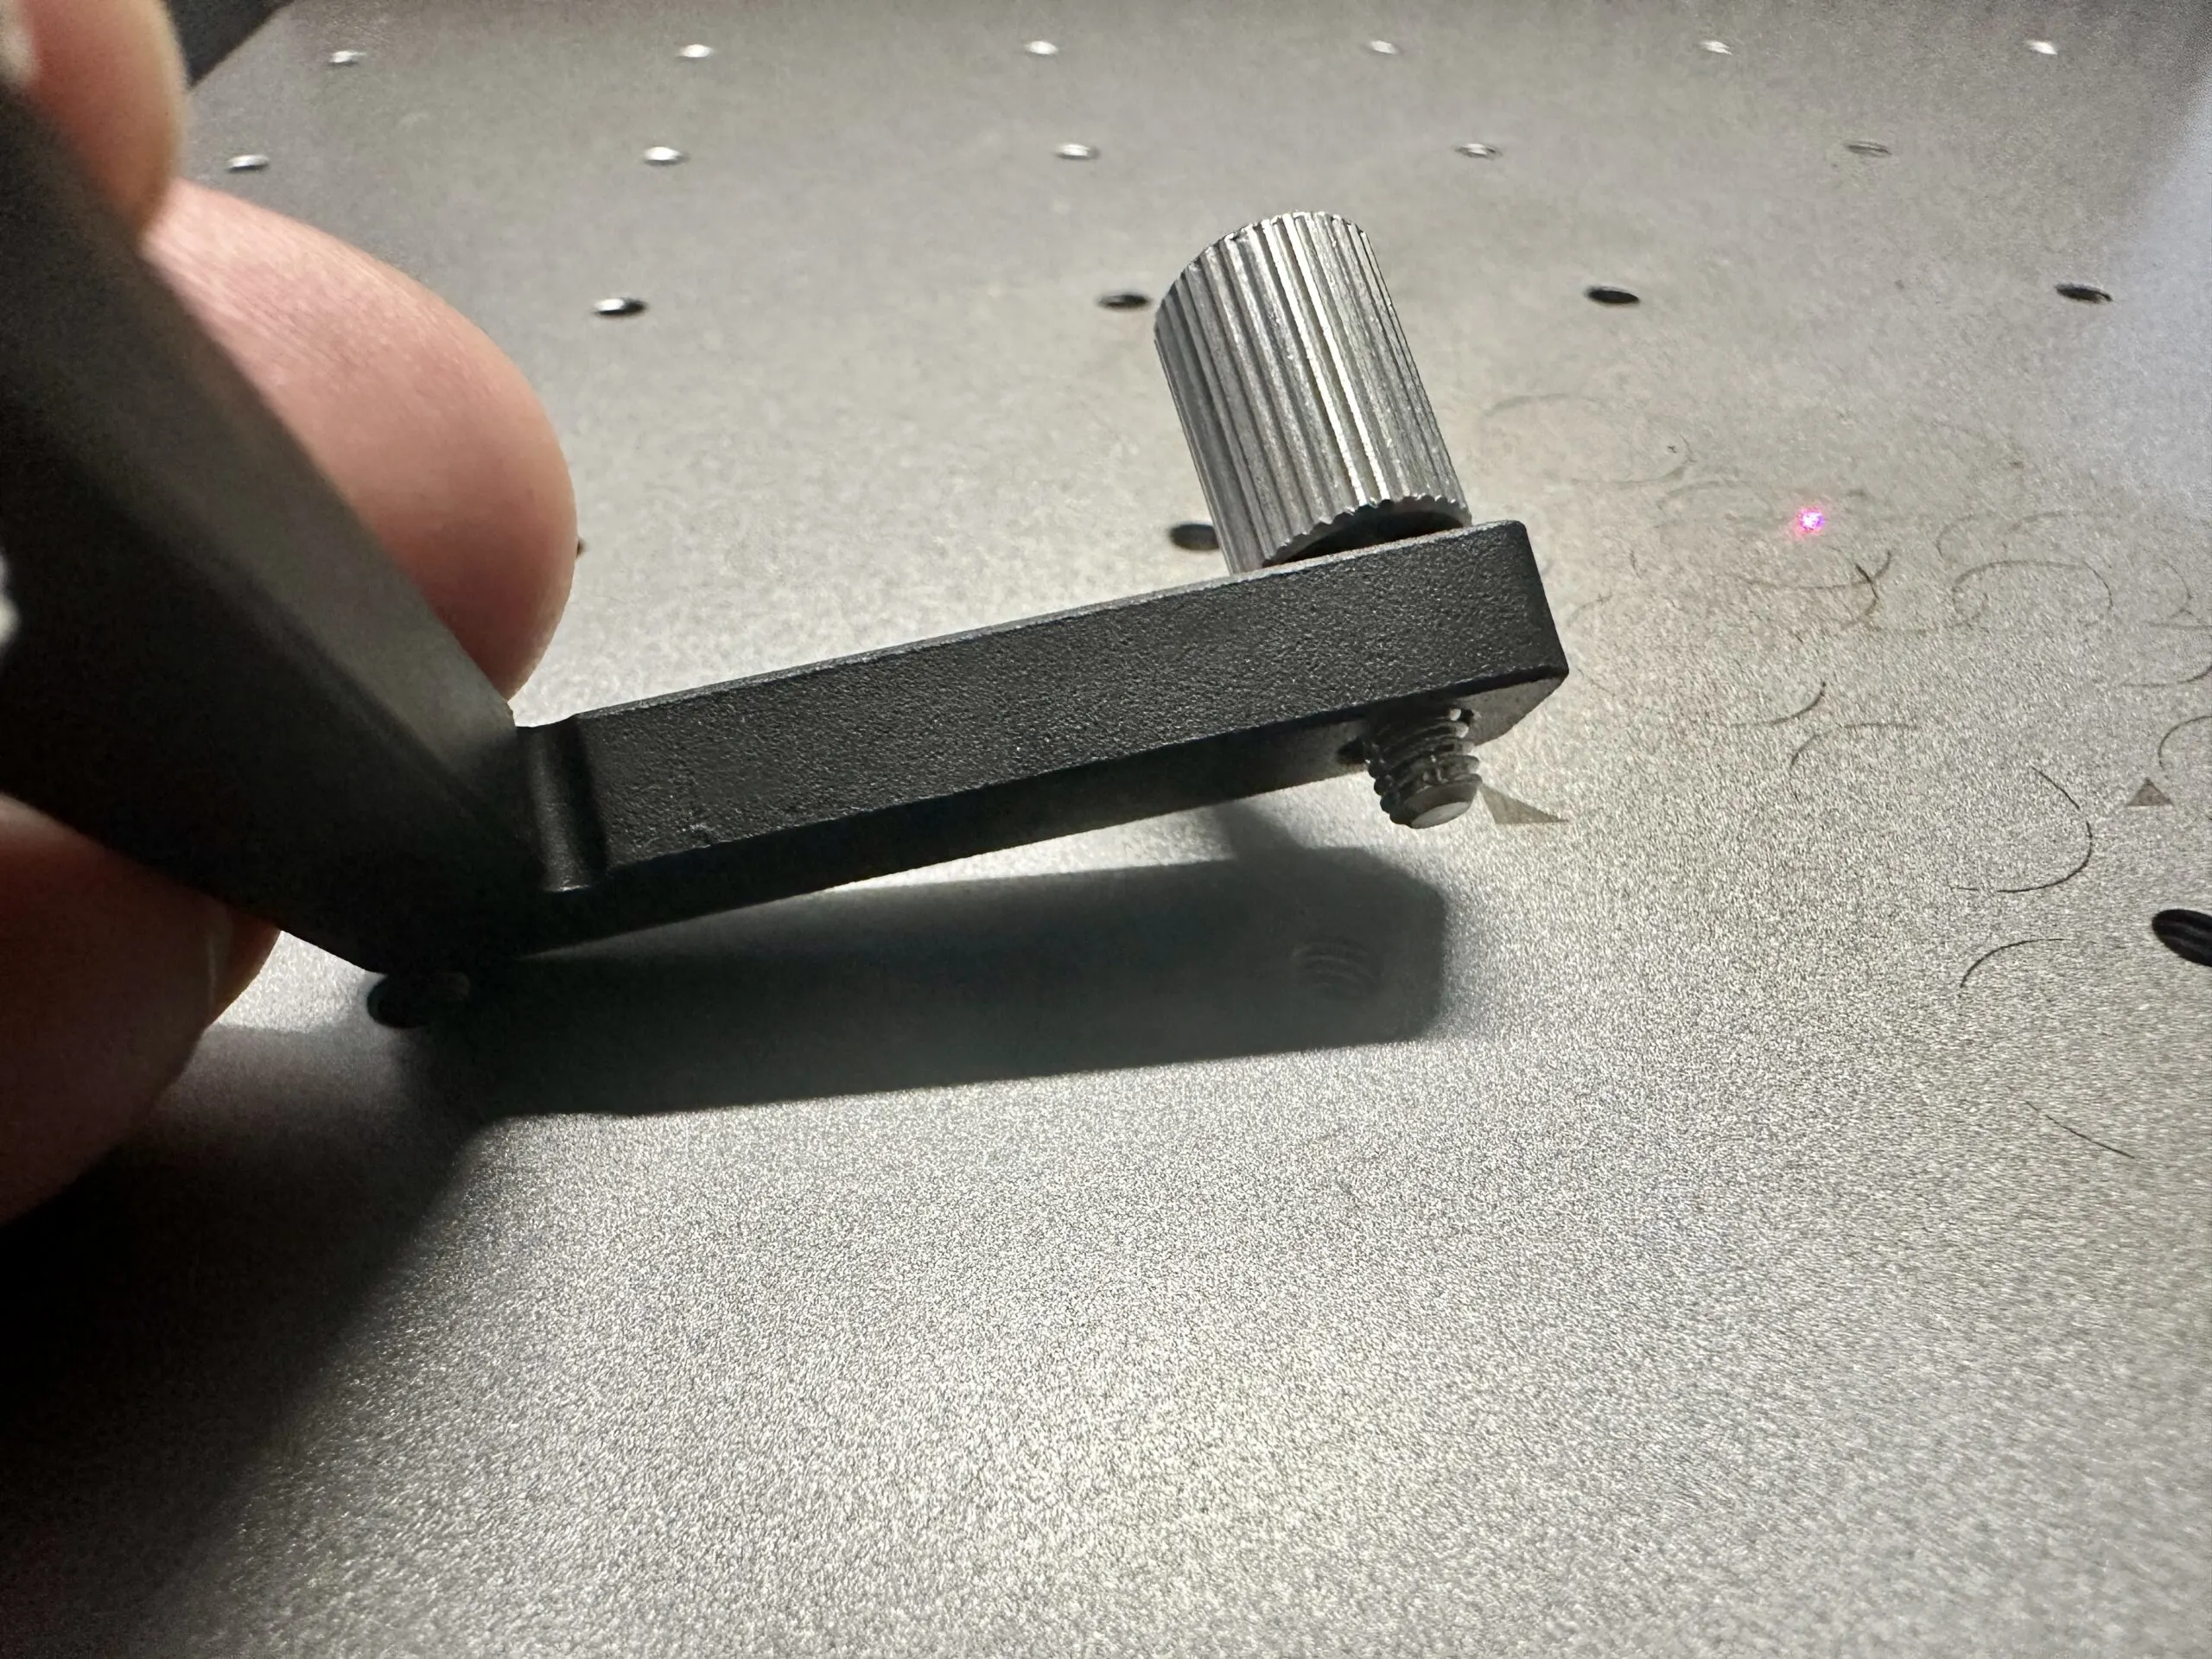 Screws on the L-shaped positioning piece - cuttingforbusiness.com